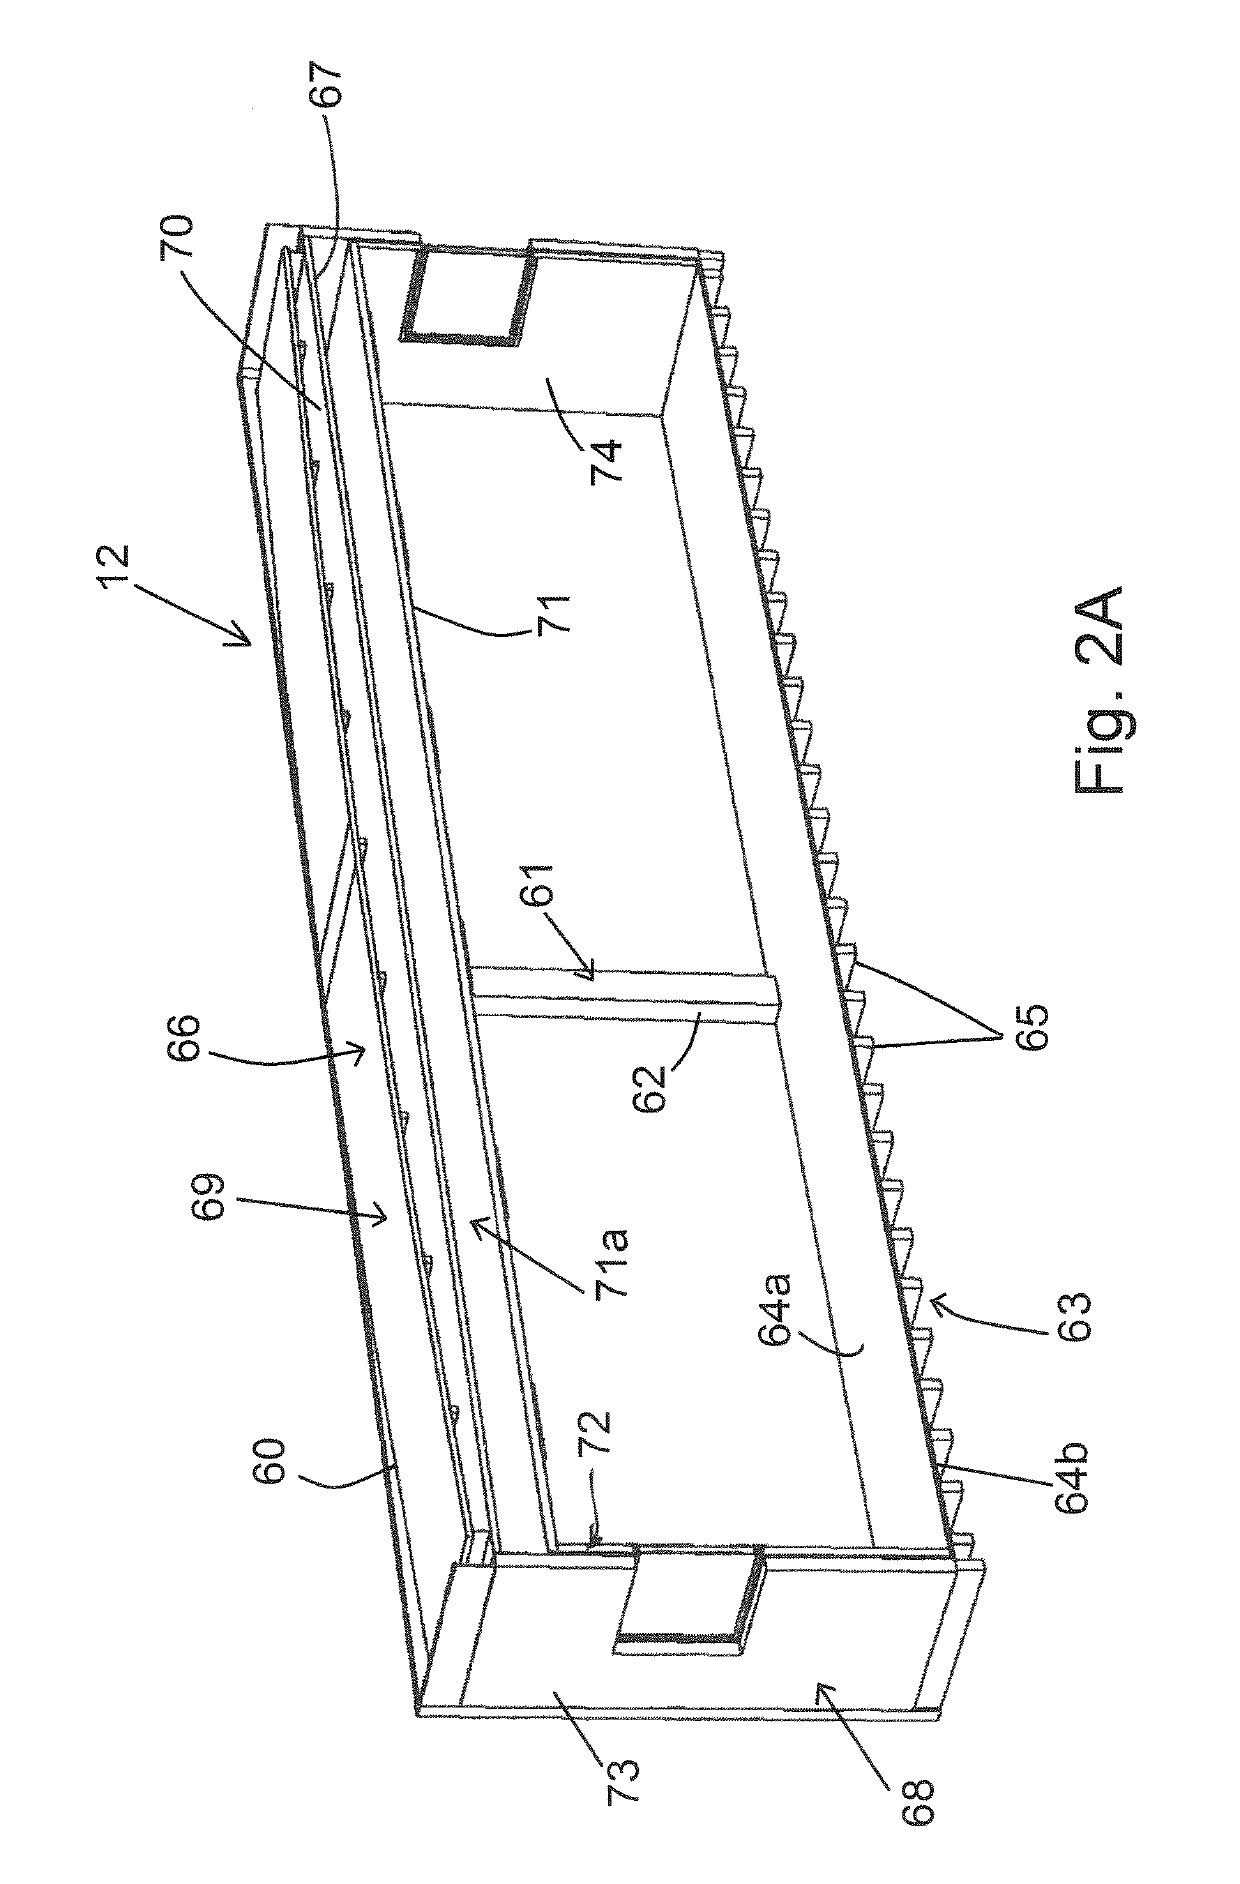 Self-contained treatment unit for haemodialysis treatments